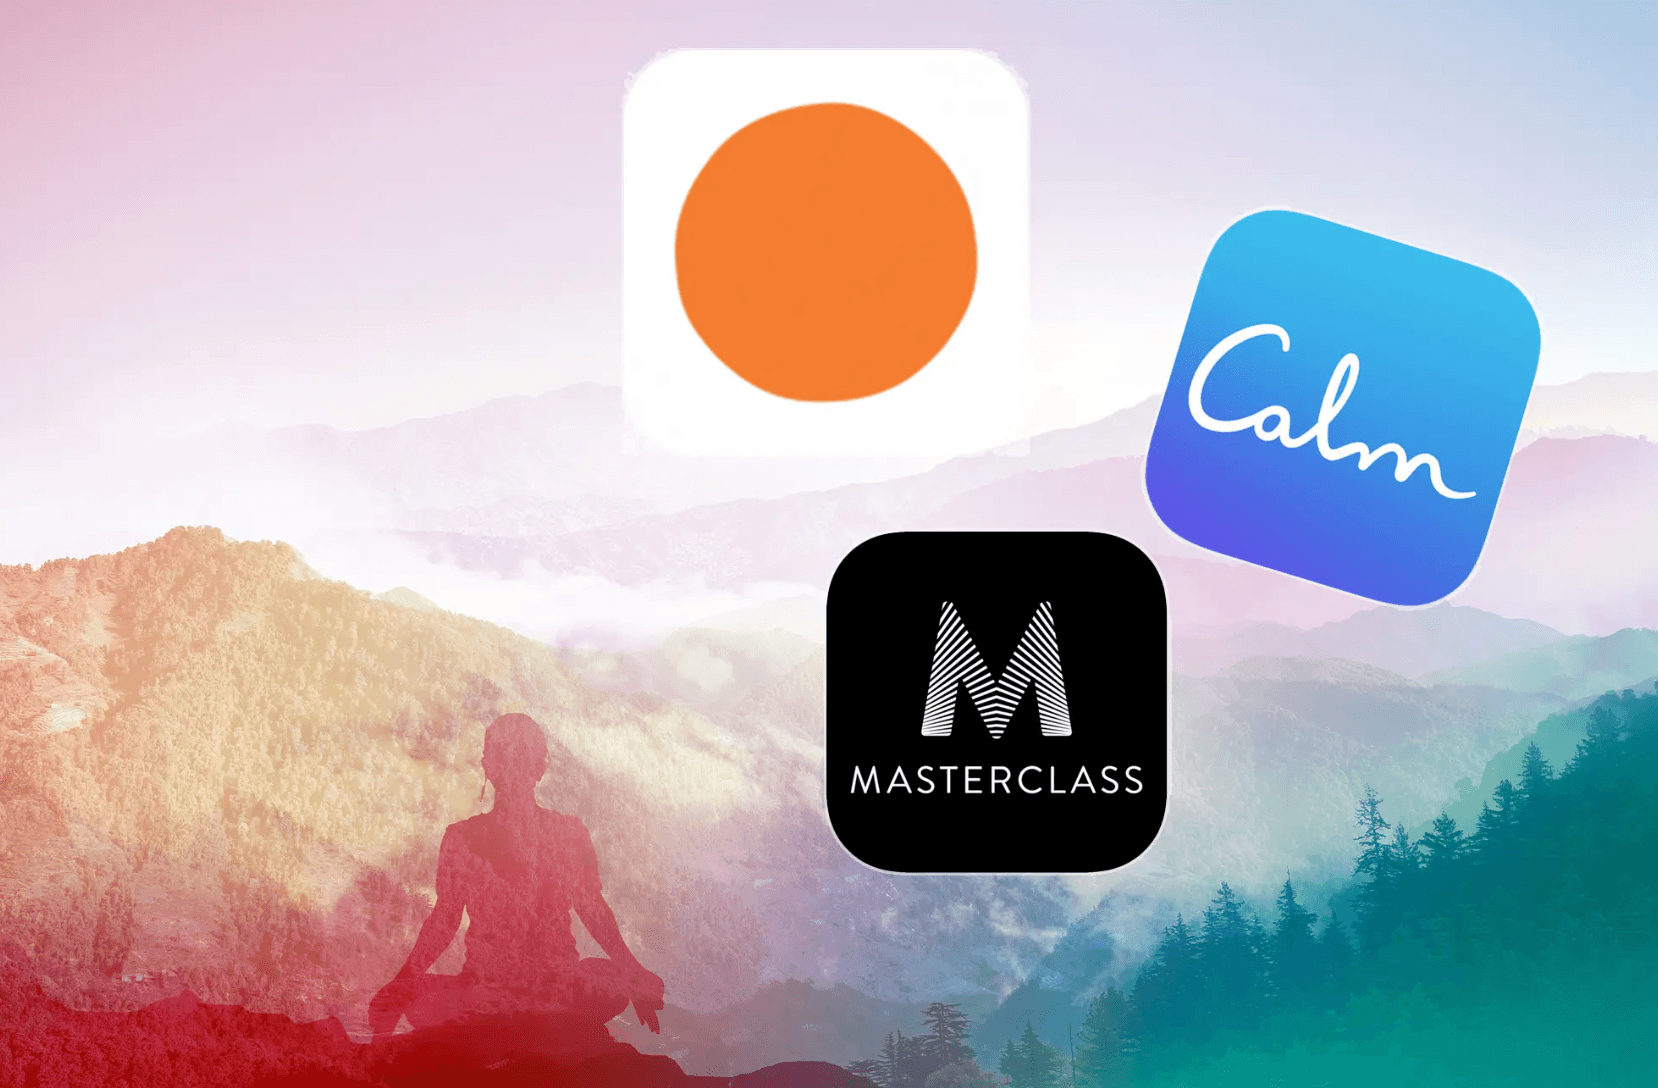 Top 5 Meditation Apps for Deep Focus and Presence - No Ordinary Moments